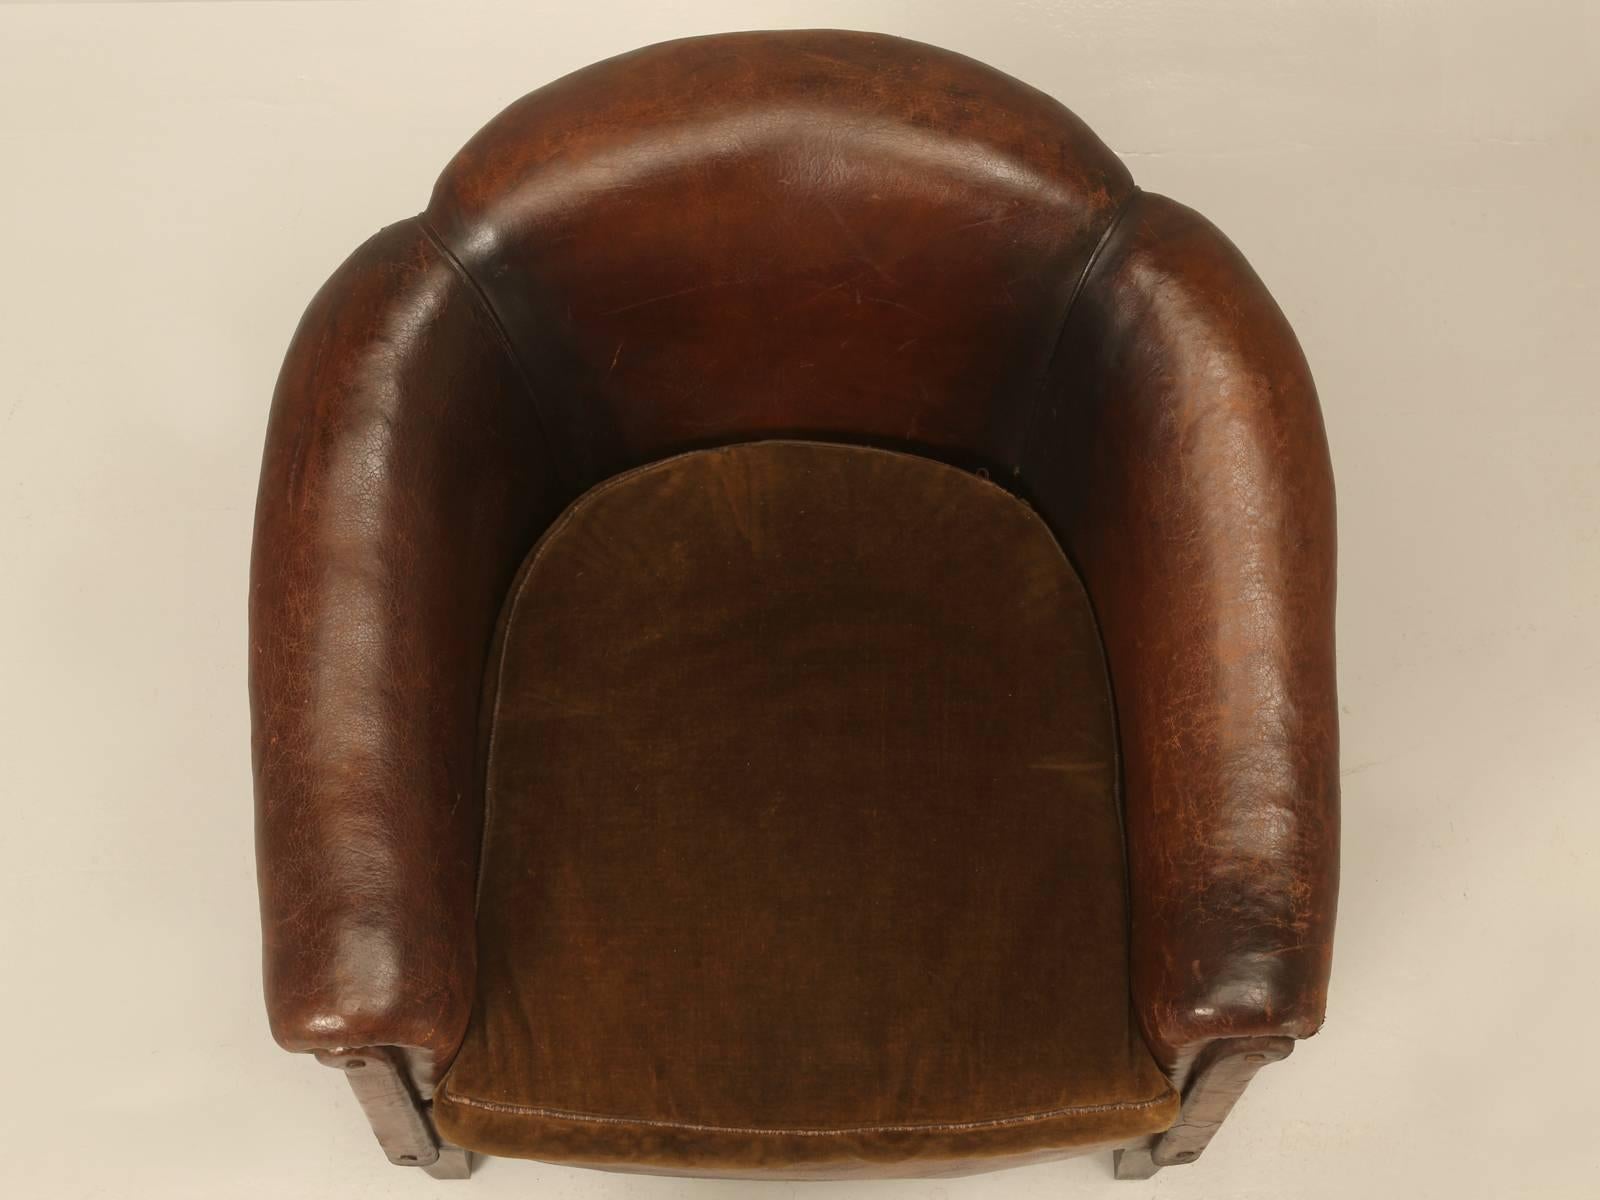 French barrelback leather chair in an all original condition and I believe even the old worn velvet on the down filled seat cushion is correct, just like you would expect on a French leather club chair. For the last 25-year’s, we have been enamored